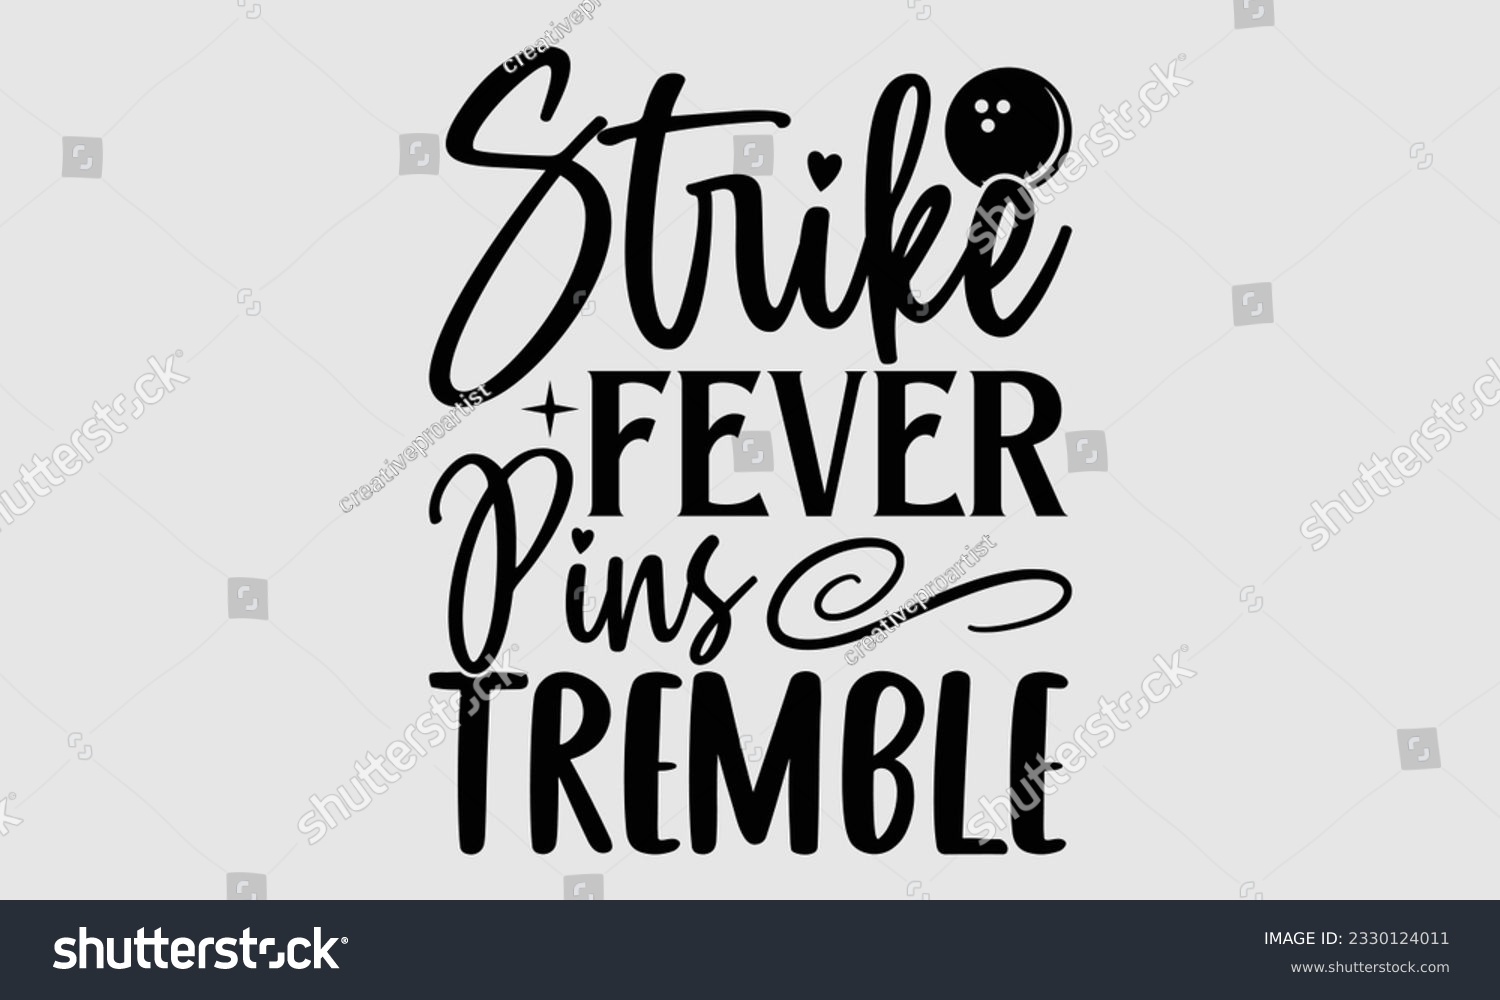 SVG of Strike Fever Pins Tremble- Bowling t-shirt design, Illustration for prints on SVG and bags, posters, cards, greeting card template with typography text EPS svg